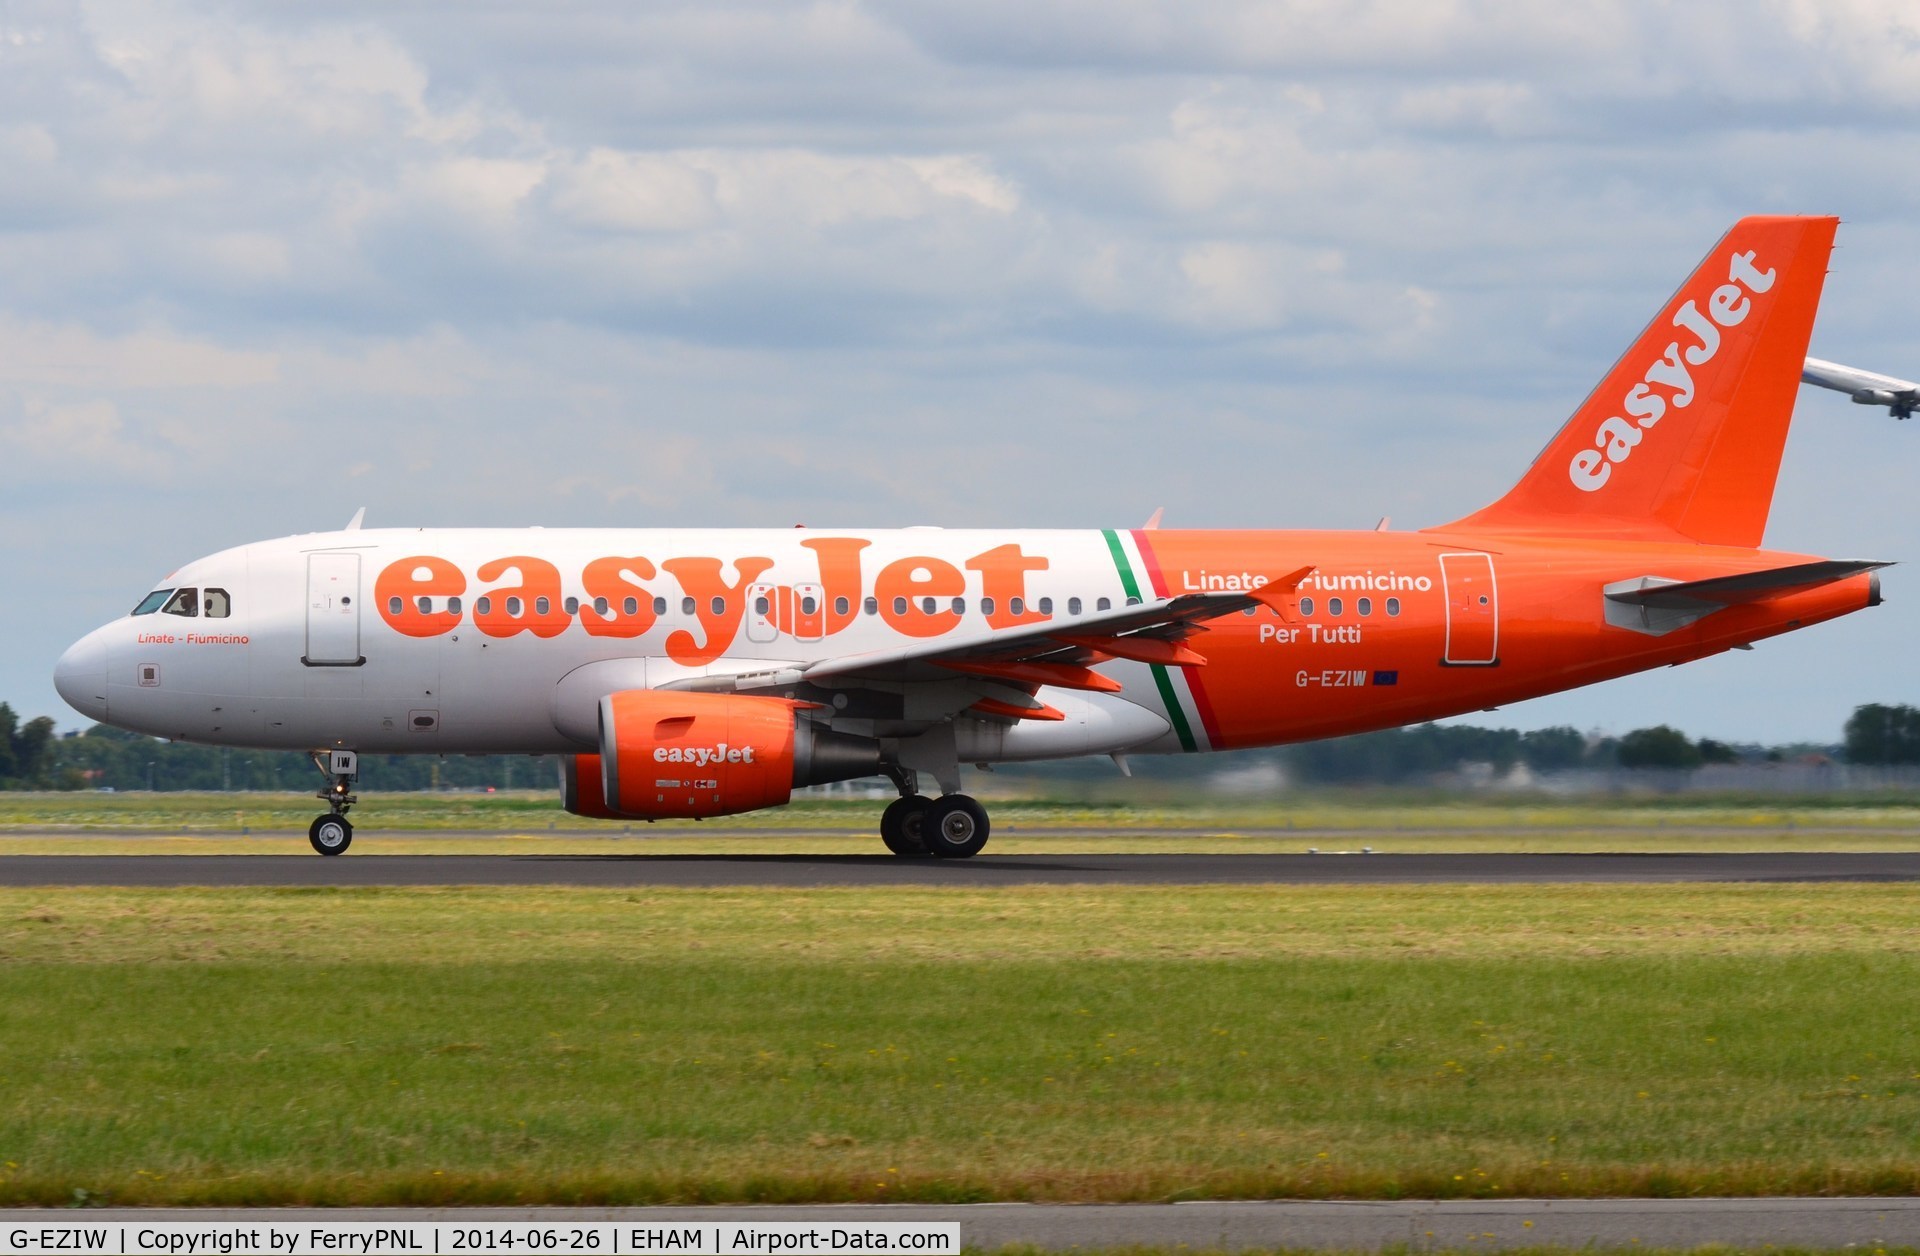 G-EZIW, 2005 Airbus A319-111 C/N 2578, Easyjet A319 with Italy promotion.